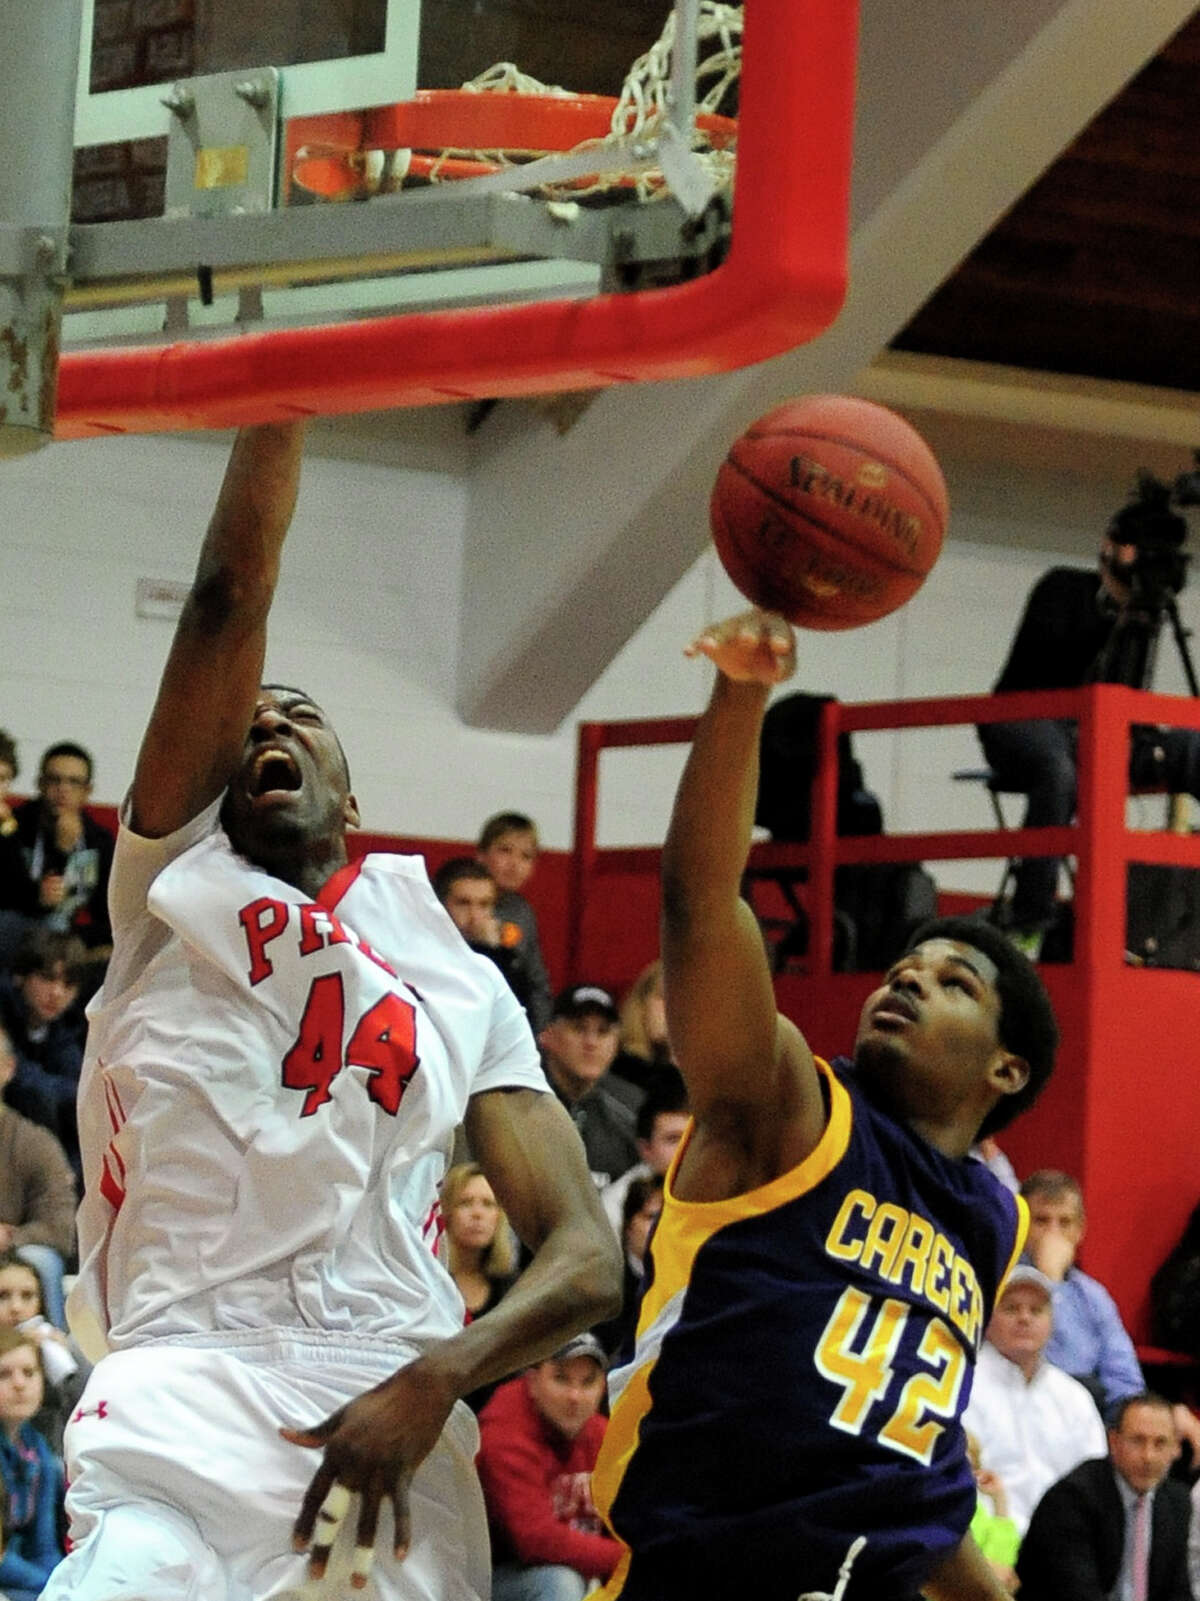 Fairfield Prep's Pascal Chukwa reacts as he slam dunks the ball, during boys basketball action against Career of New Haven in Fairfield, Conn. on Thursday February 20, 2014. At right is Career's Alden Singley.